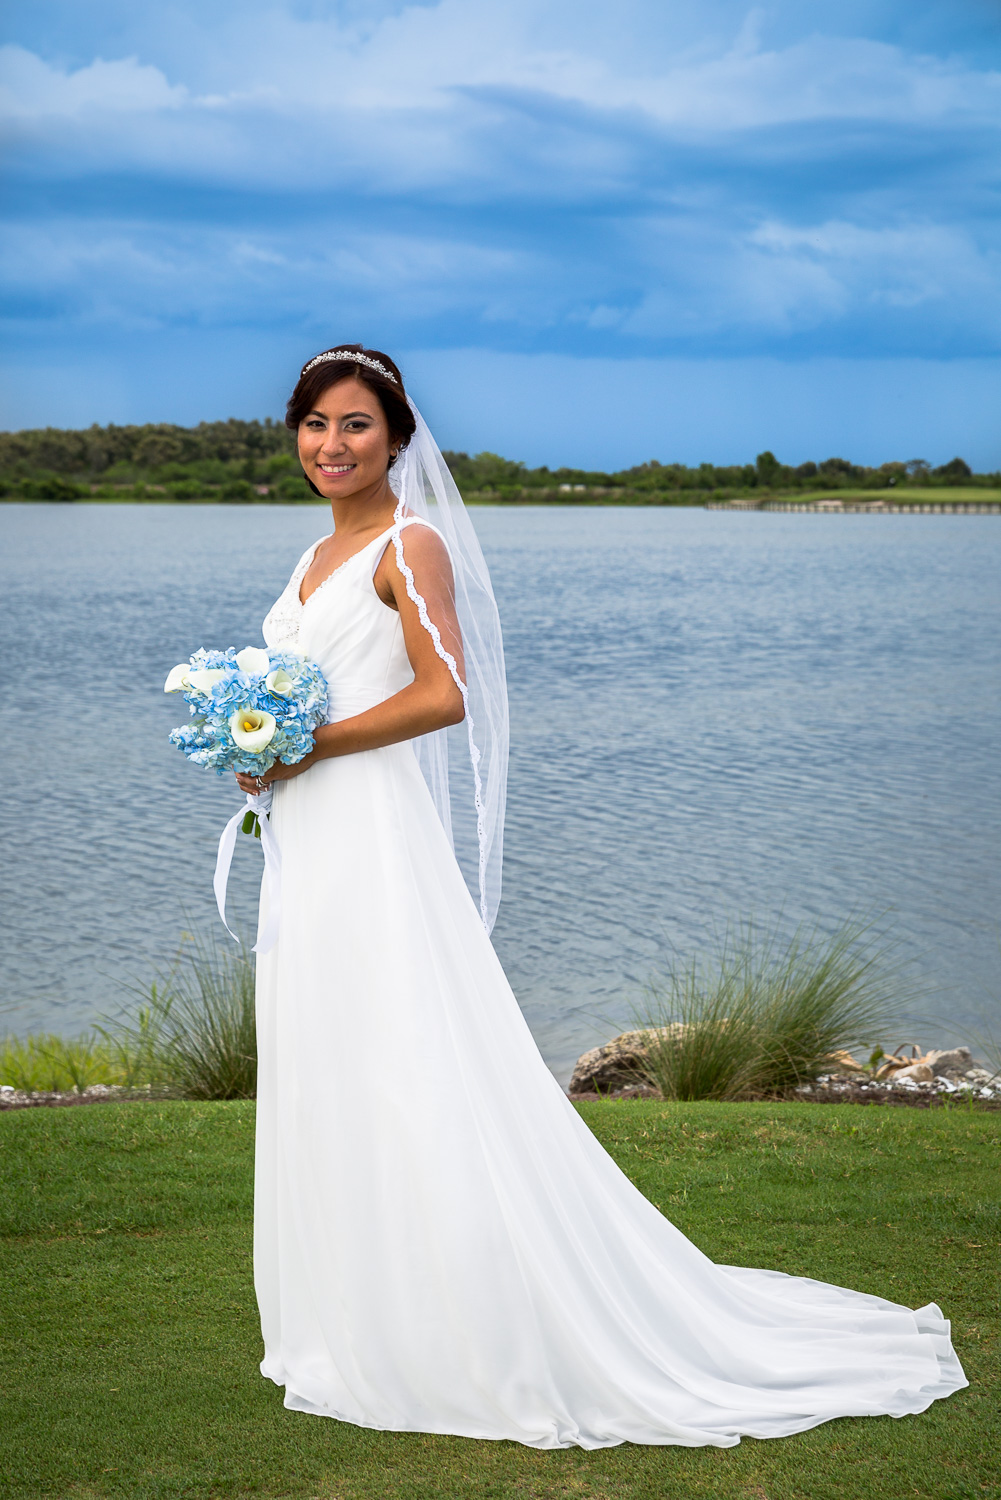   Steve McCarthy Photography: Premier SWFL Wedding Photographer serving all of SWFL  , from Tampa to Naples, Fort Myers Beach, Pine Island, Sanibel, Captiva and Marco Island and over to Miami and up to Delray Beach, including: Tampa, Sarasota, Venice